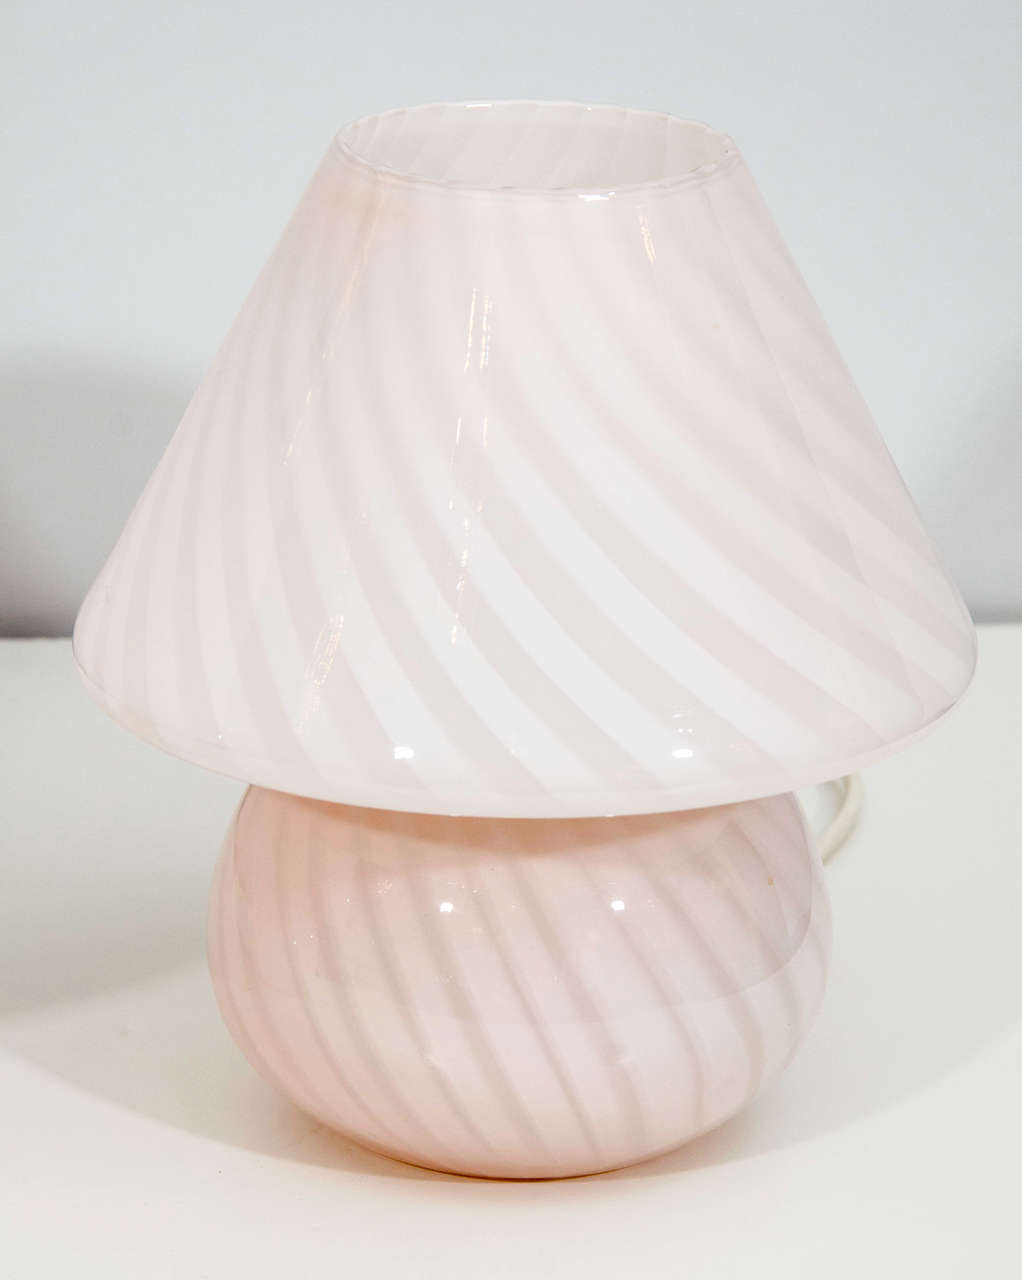 Hollywood Regency Pair of Charming Murano Lamps